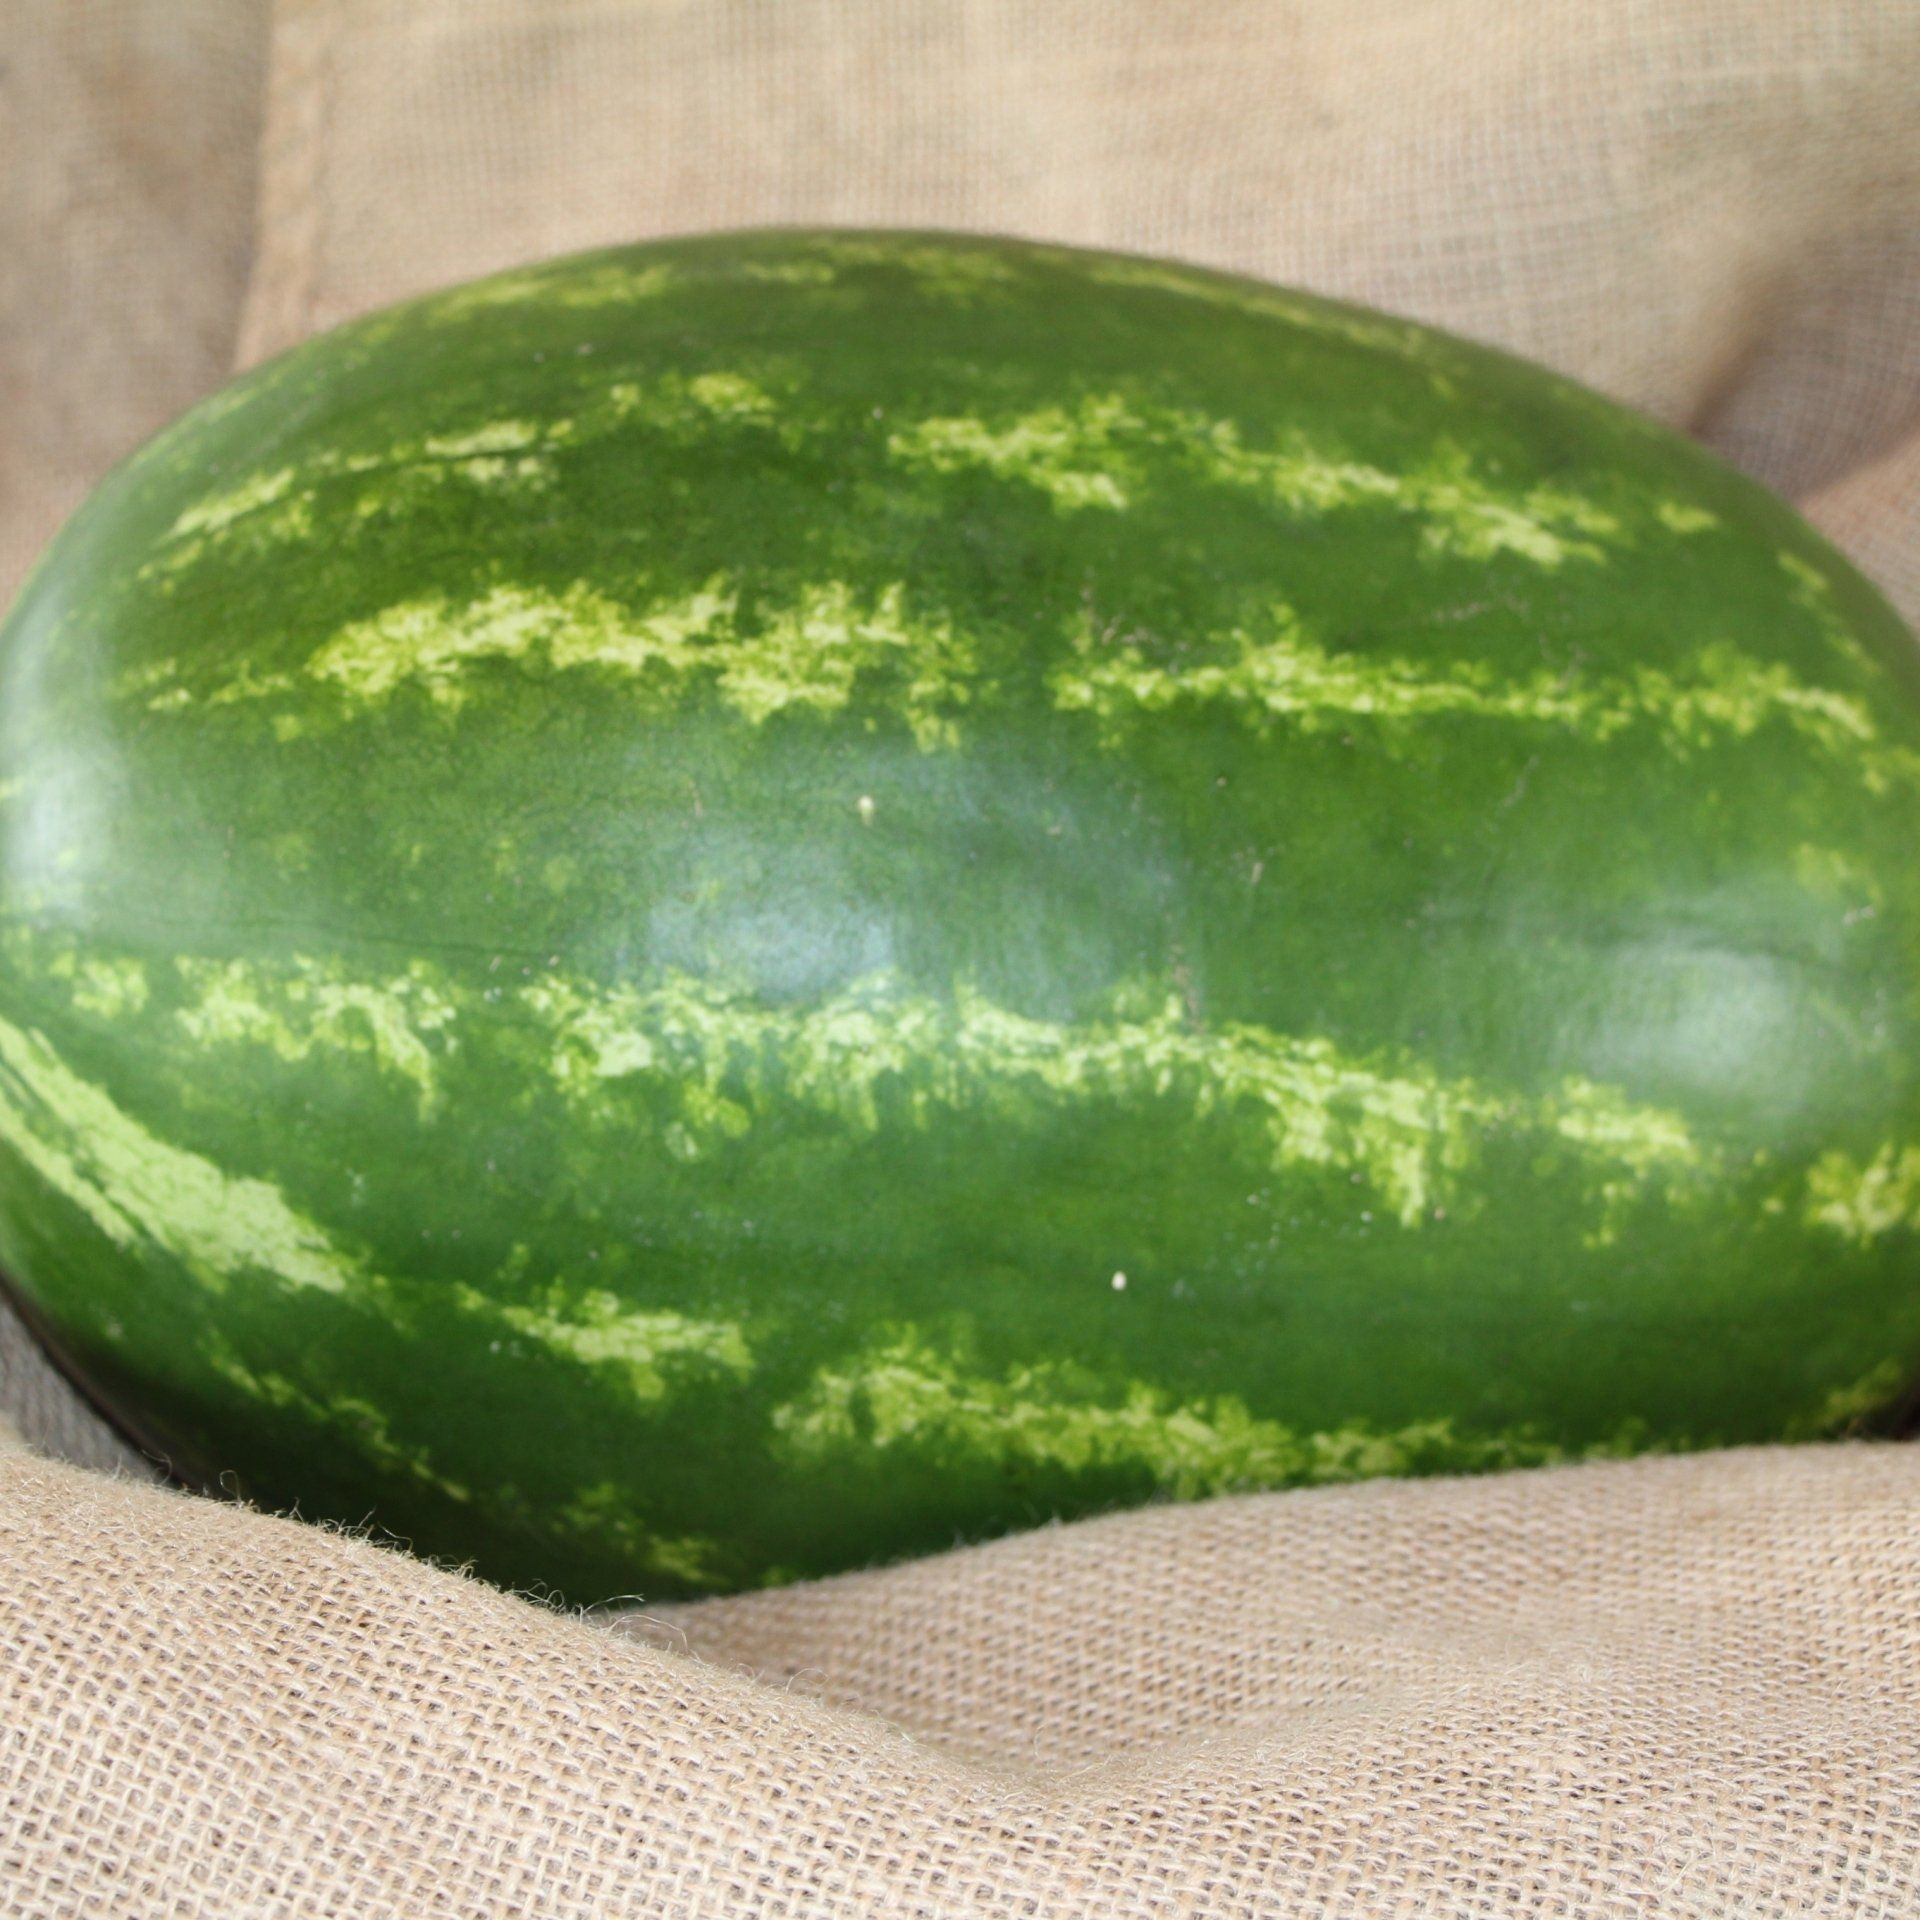 locally grown seedless watermelons